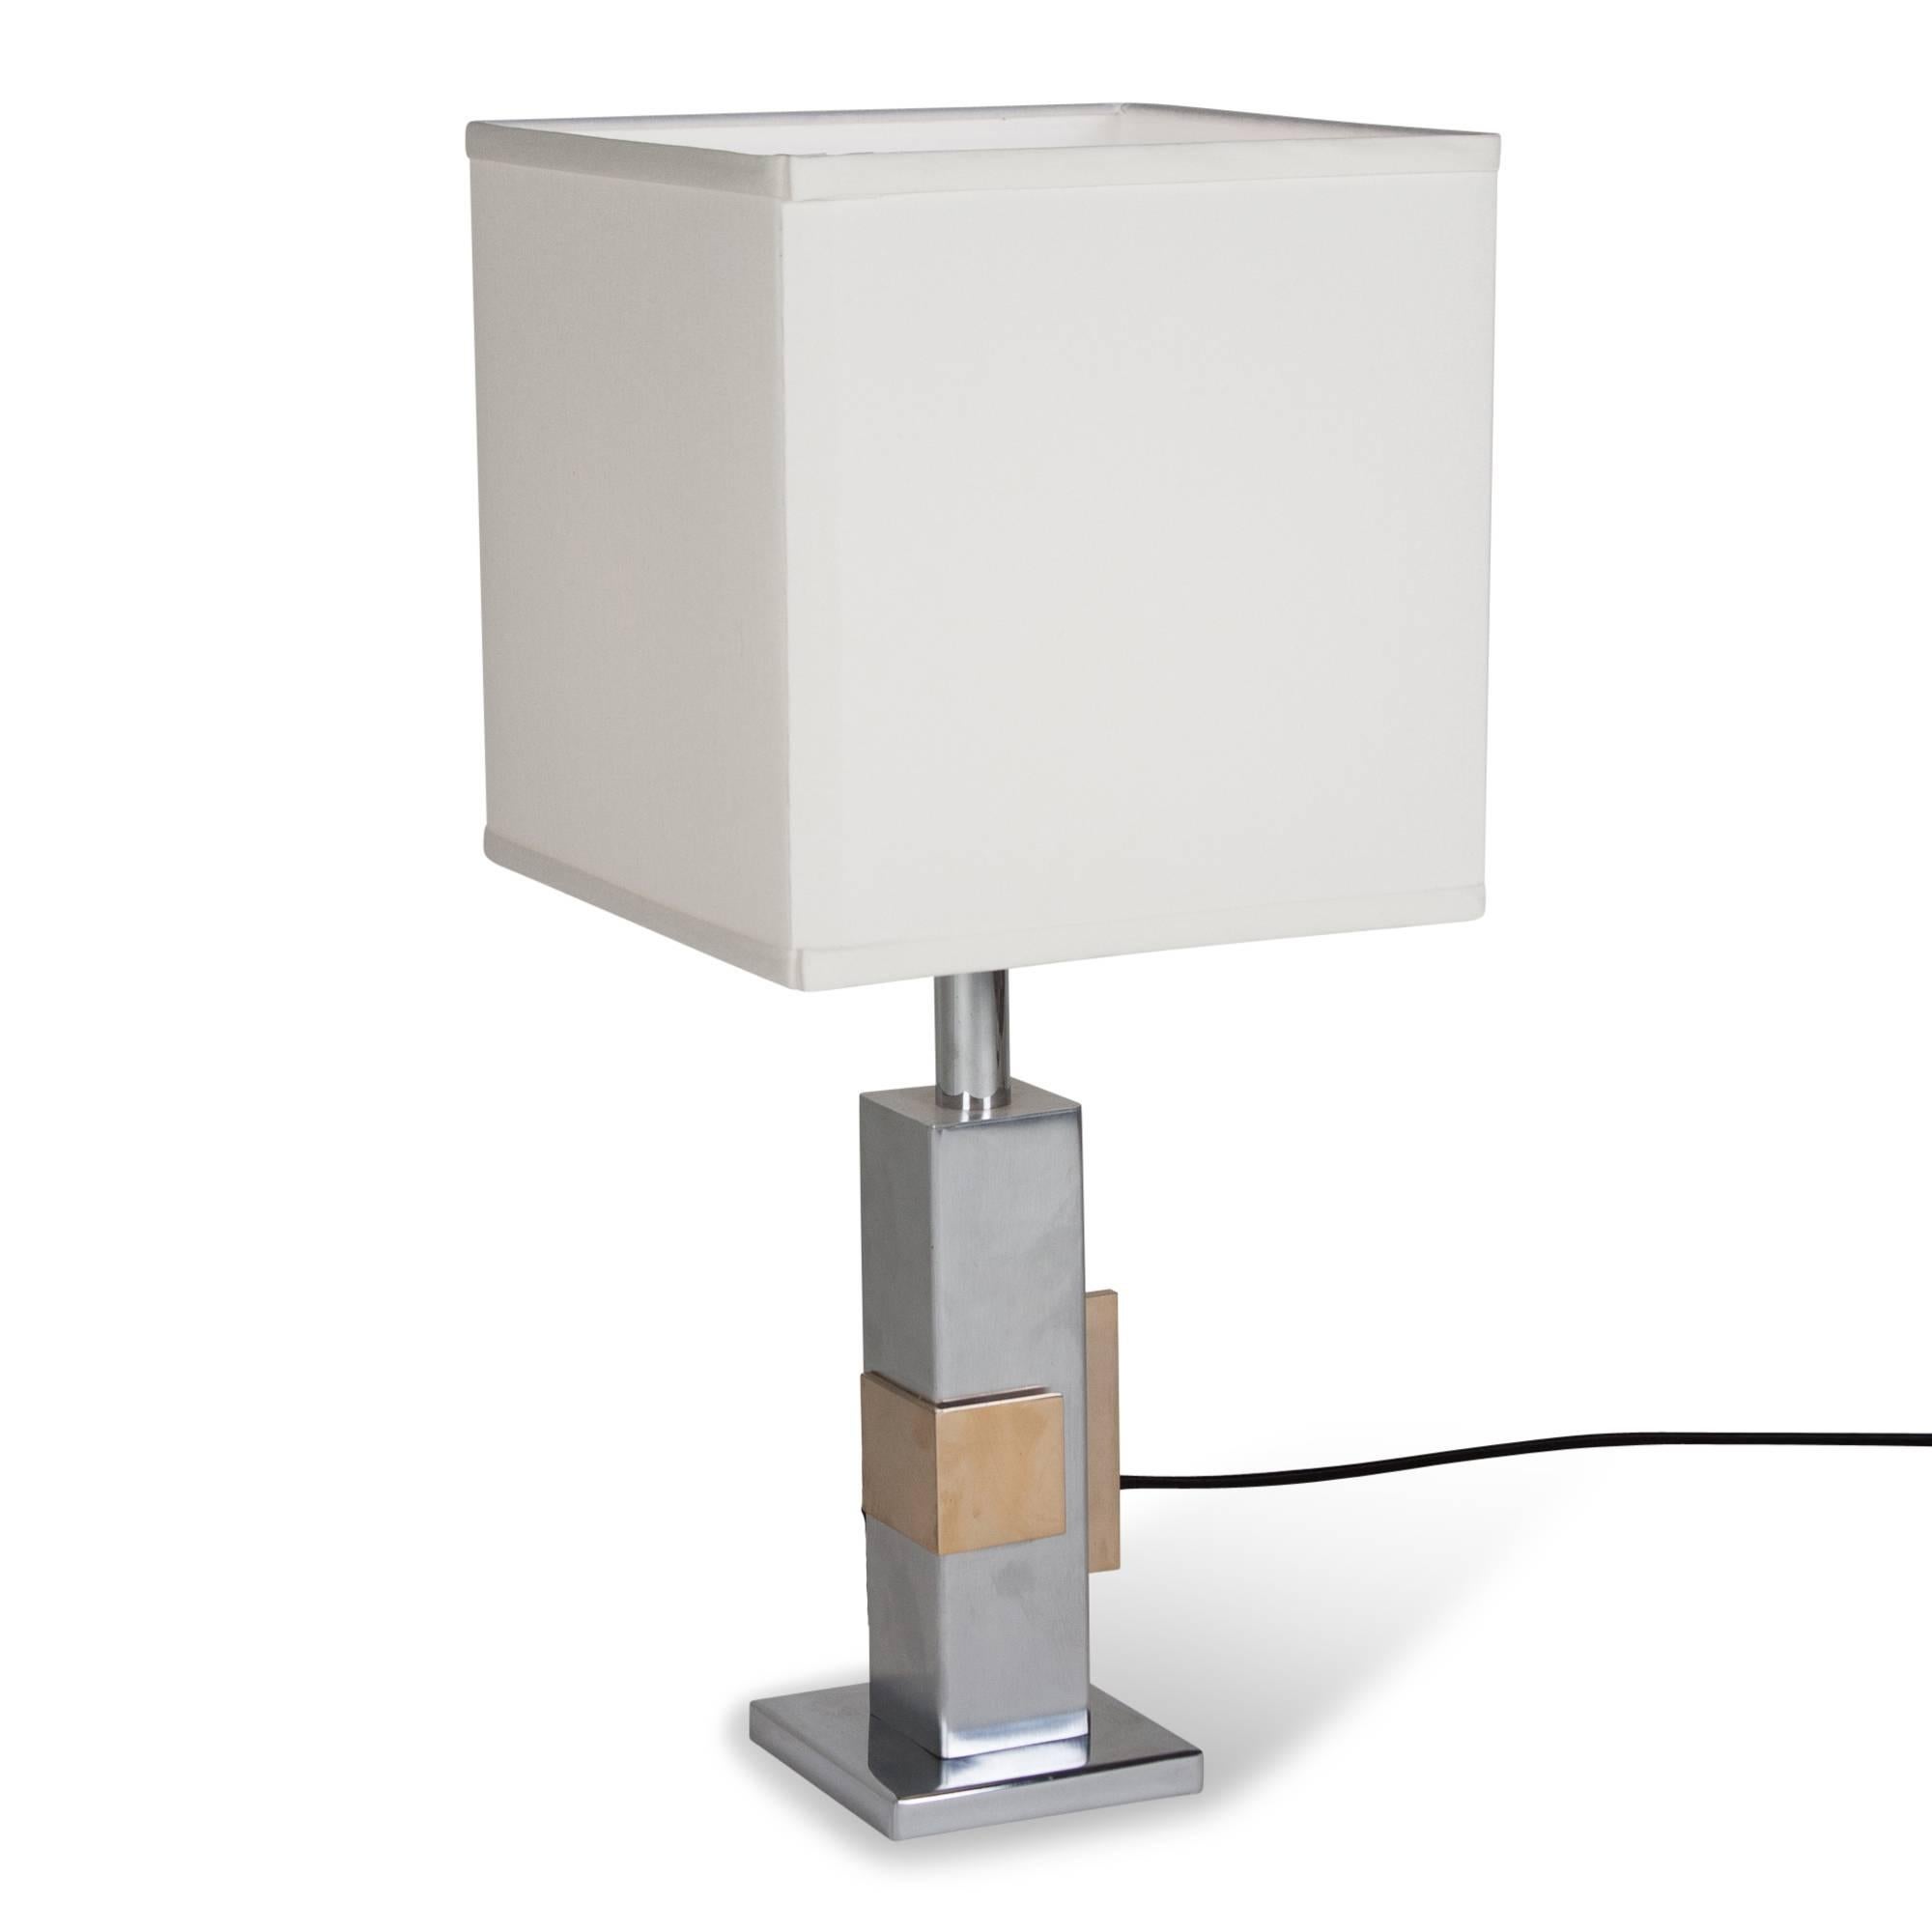 Late 20th Century Geometric Chrome and Bronze Table Lamp, French, 1970s For Sale